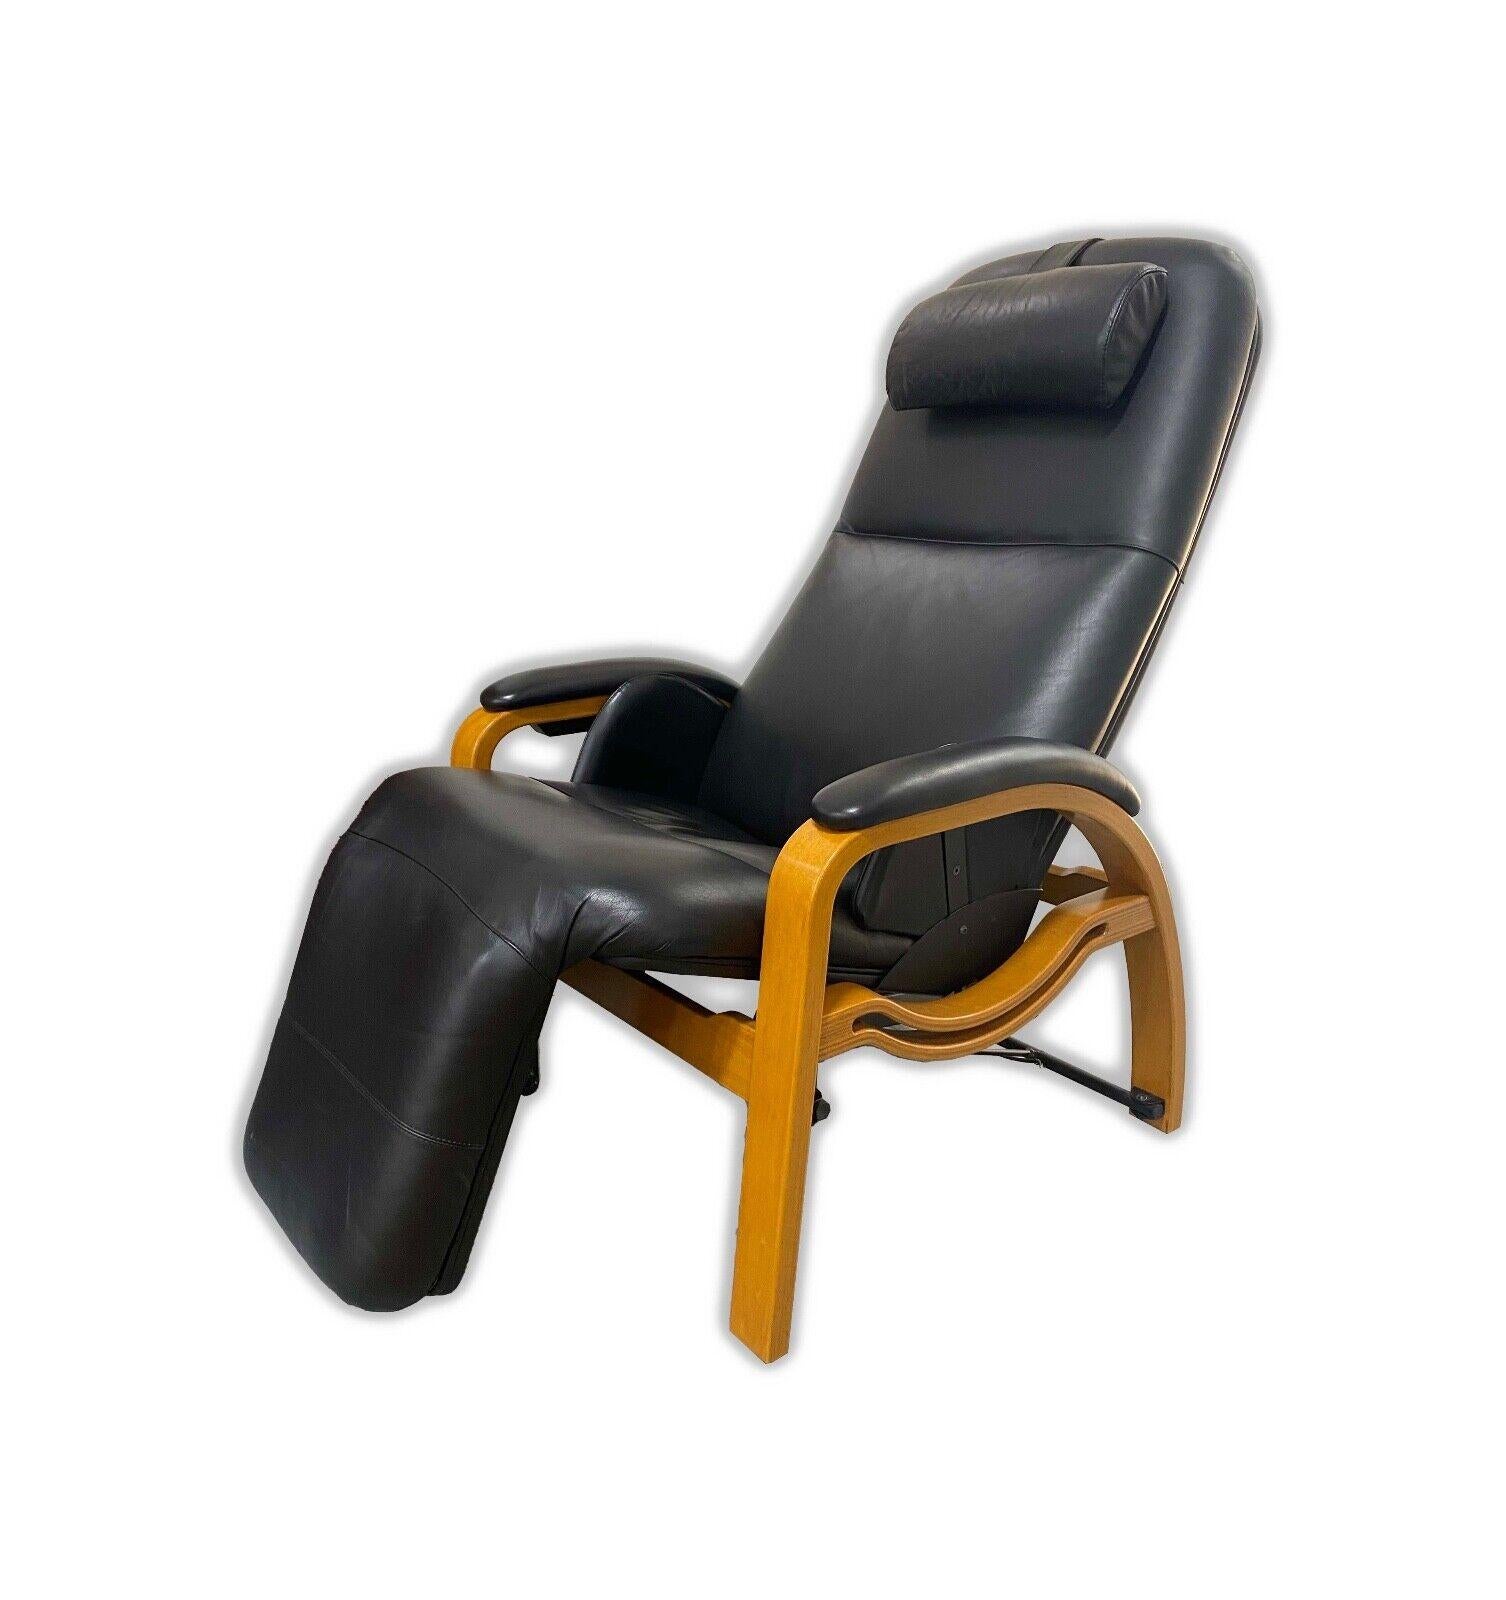 The Back Saver Zero Gravity Massage Chair is an embodiment of comfort and modern design, featuring a sleek mid-century modern style. It is upholstered in luxurious black leather, complemented by smooth, curved wooden accents that add a touch of